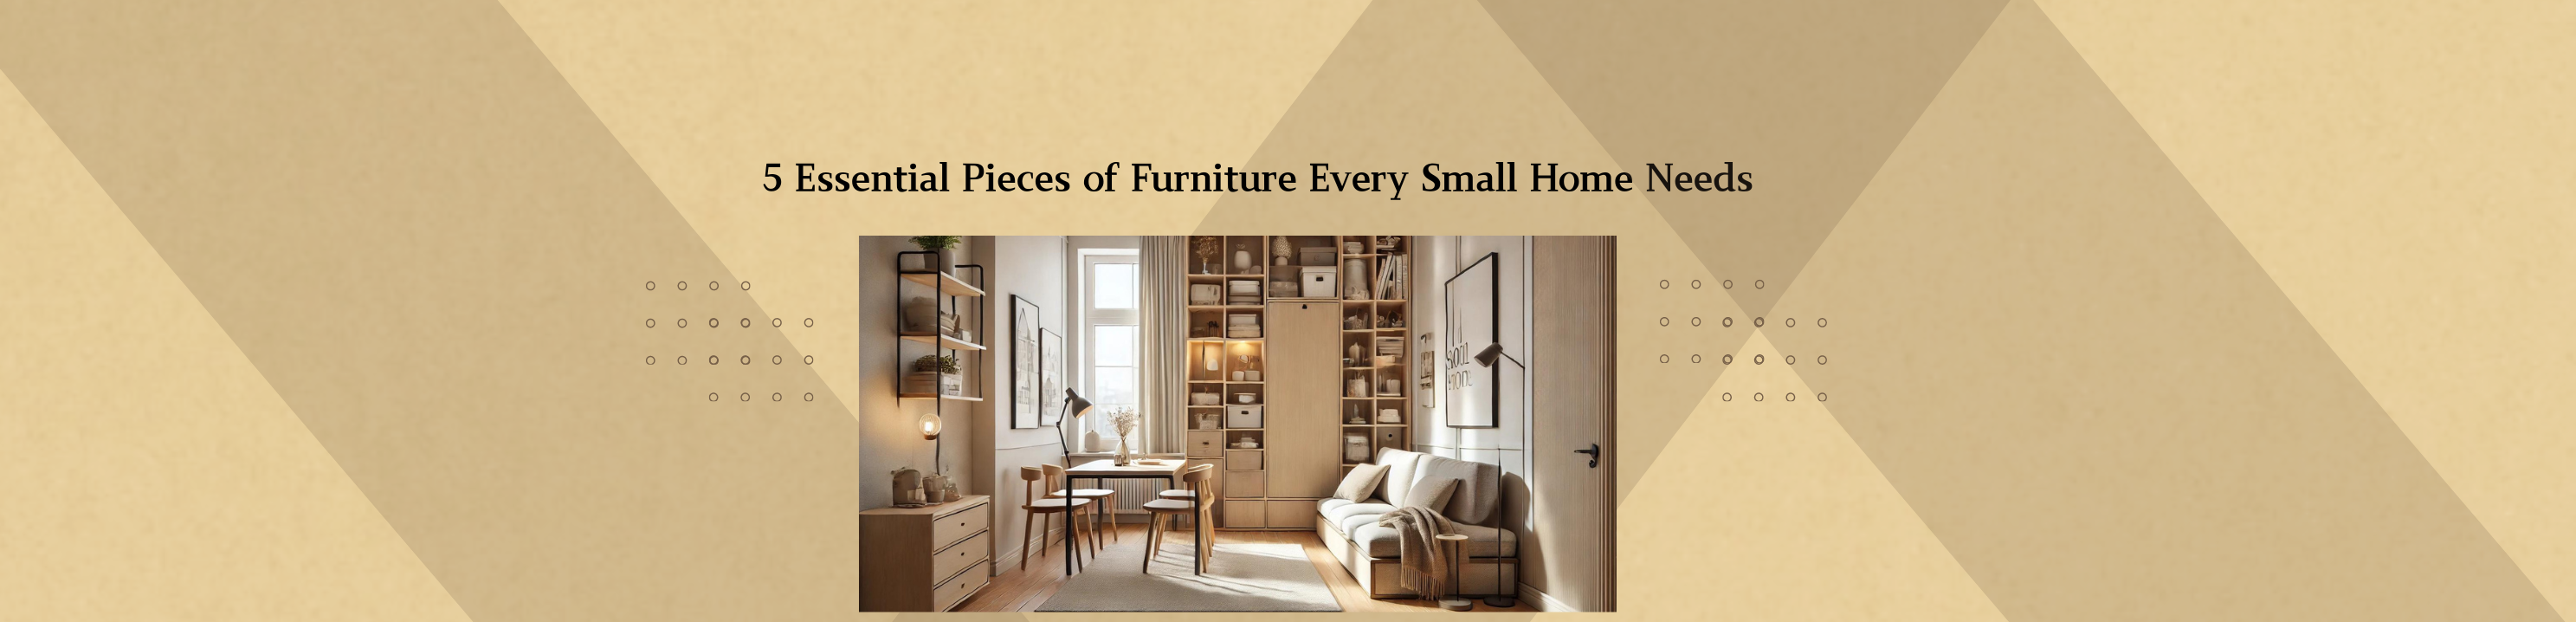 5 Essential Pieces of Furniture Every Small Home Needs